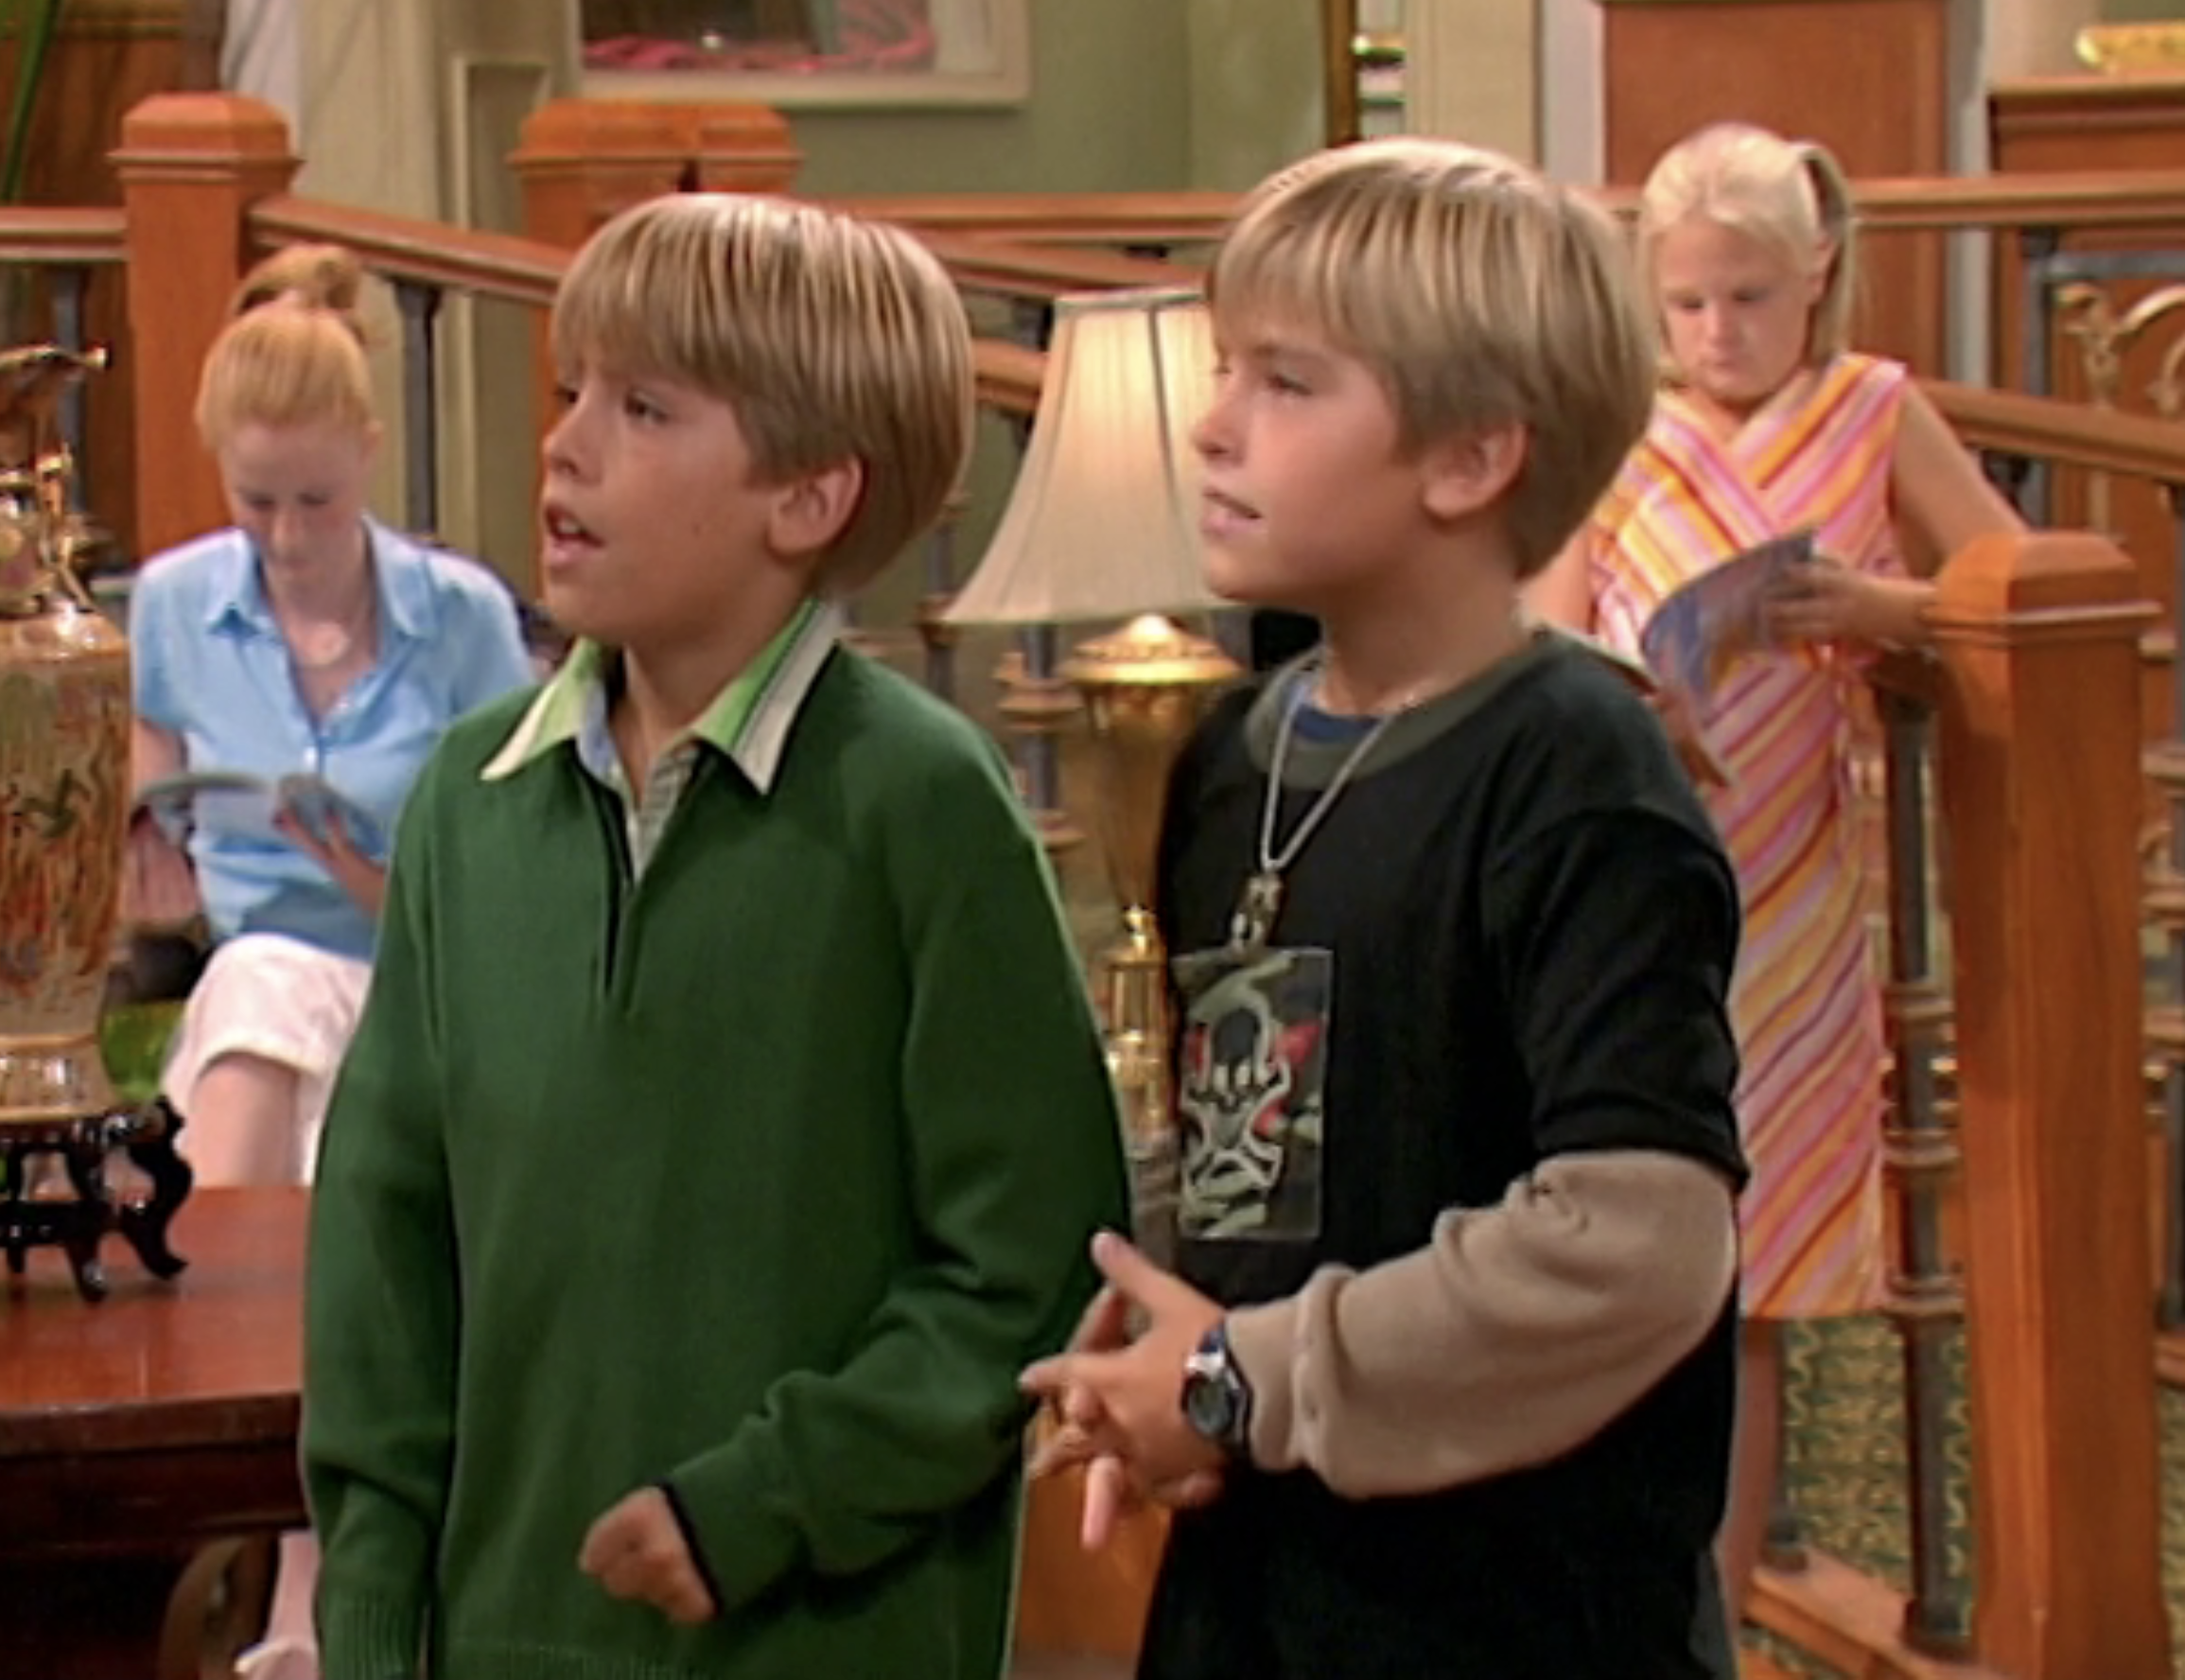 Dylan and Cole standing together in a scene from &quot;The Suite Life of Zack and Cody&quot;